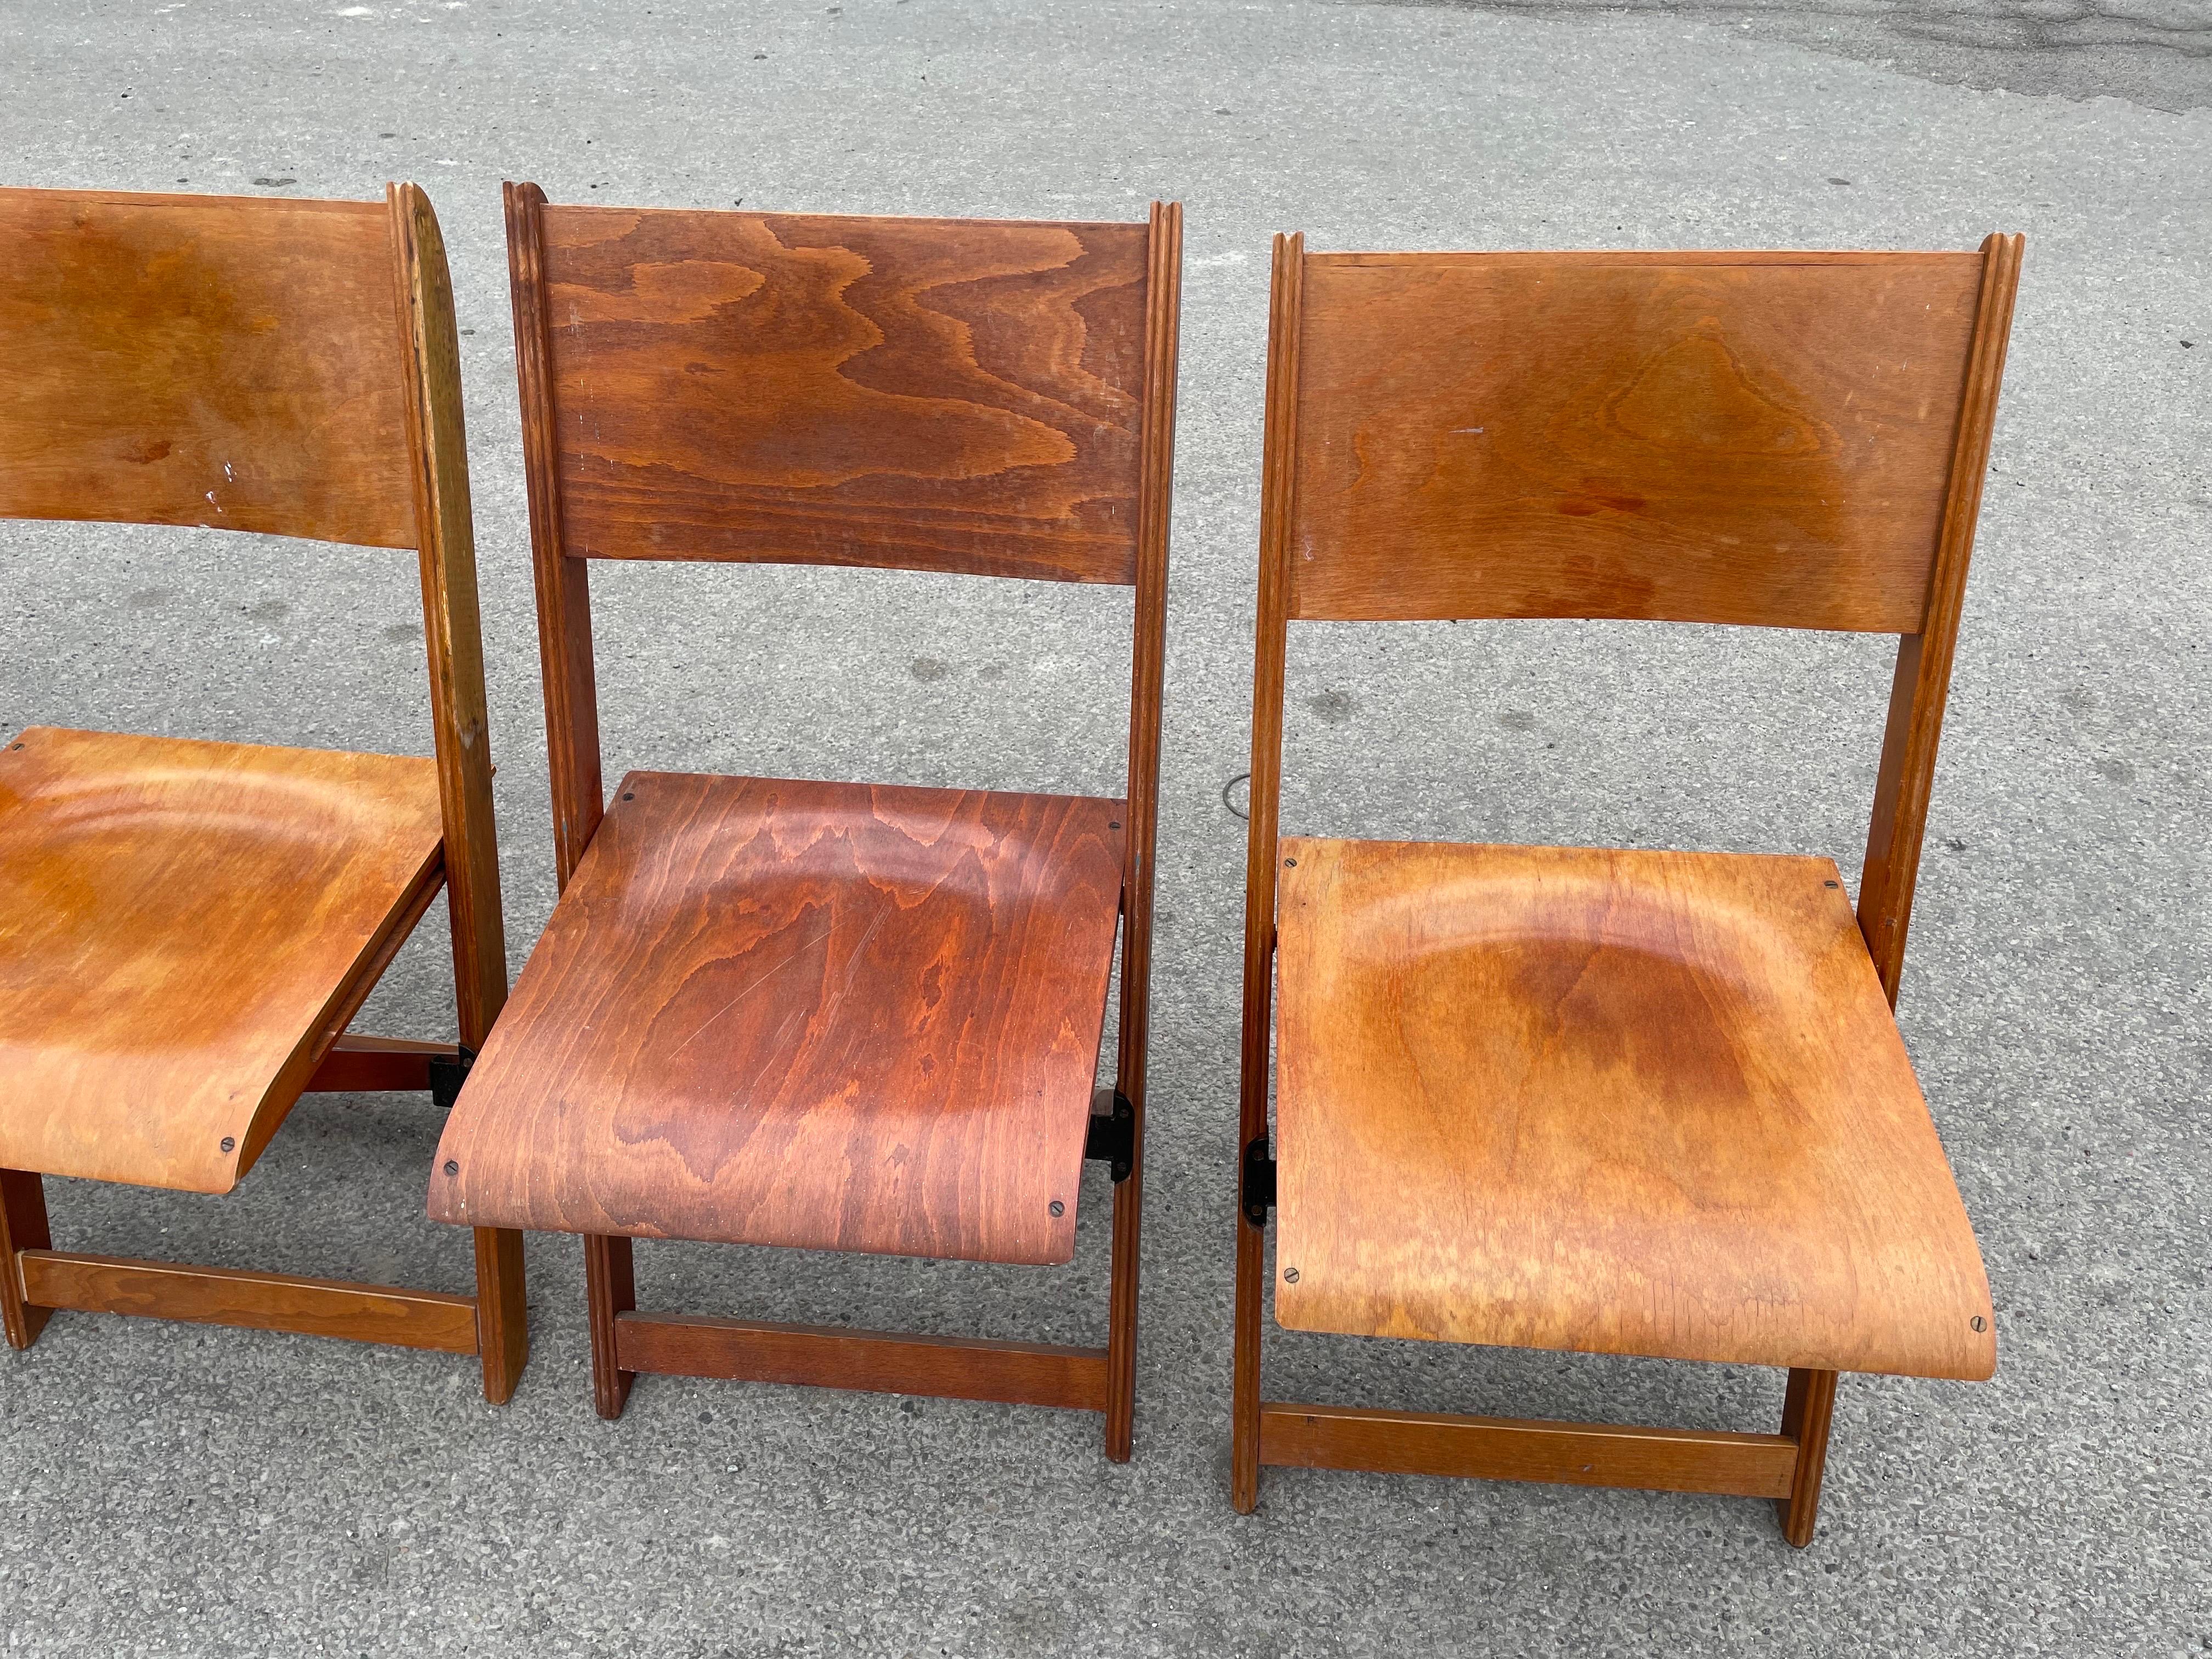 Mid-20th Century Foldable Danish Chairs from 1930’s